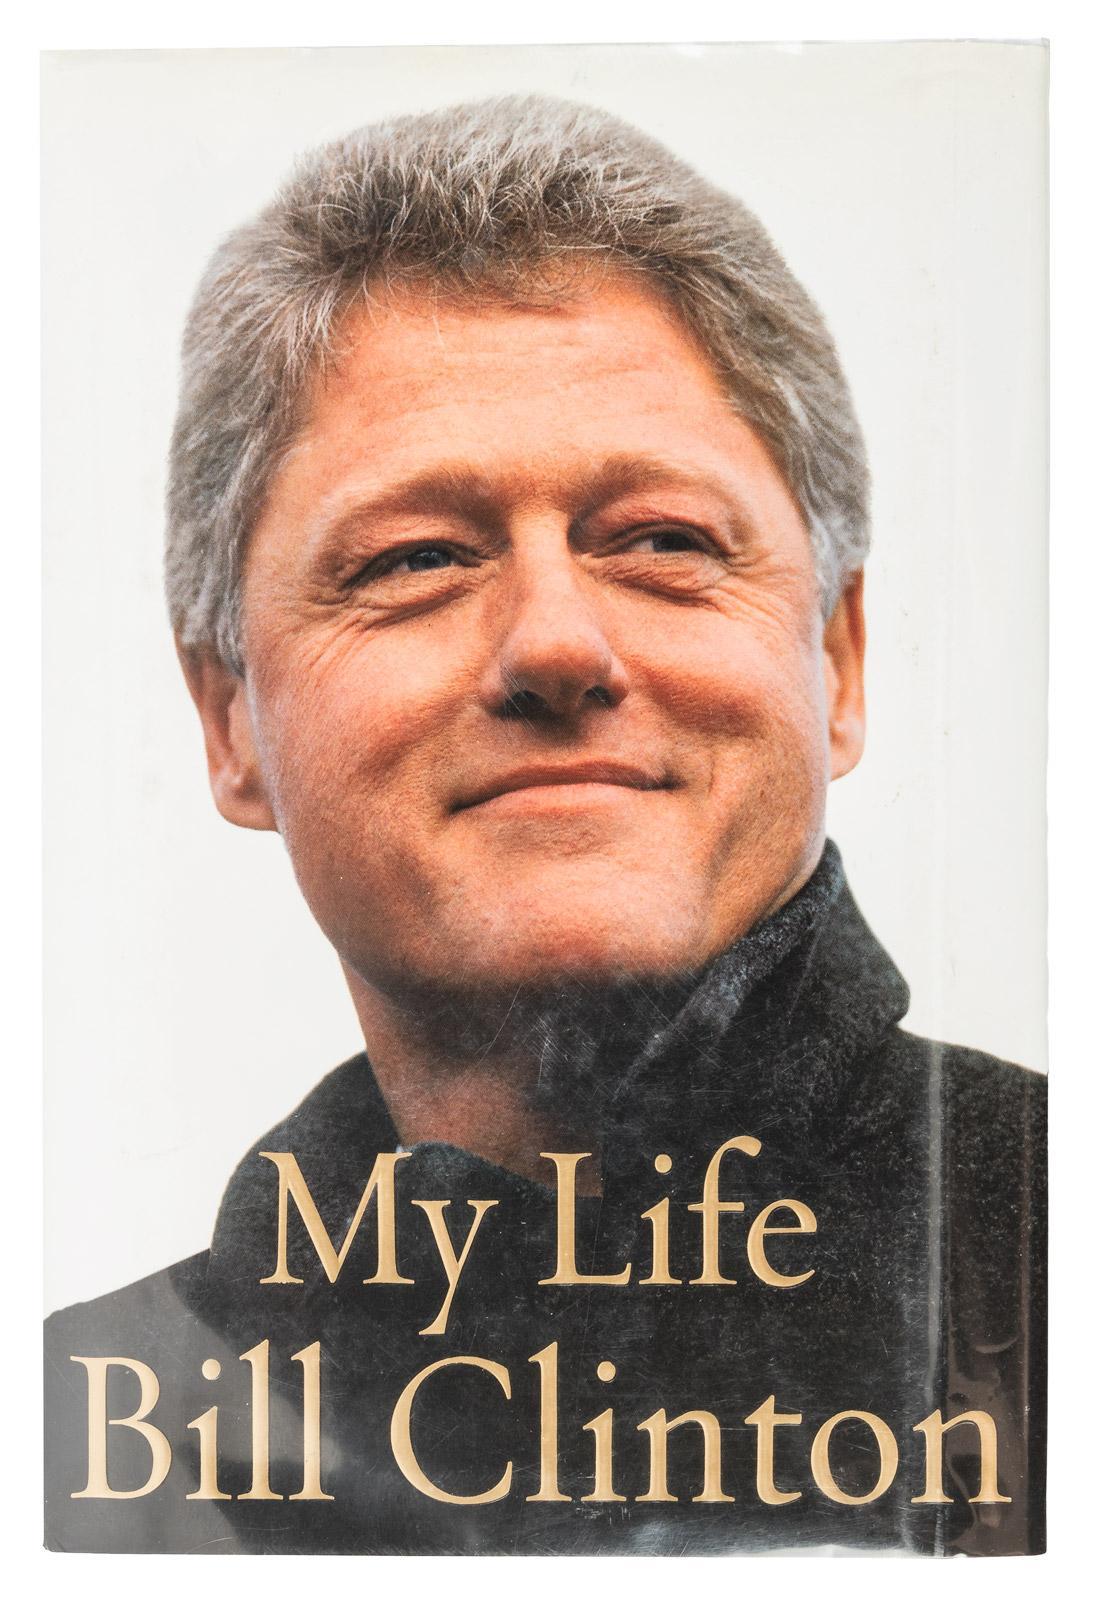 Clinton, Bill. My Life.  New York: Alfred A. Knopf, 2004. First edition, first printing, 8ov. Signed by Bill Clinton on the title page. Presented in original blue boards and pictorial dust jacket.

This is a signed first edition of Bill Clinton's